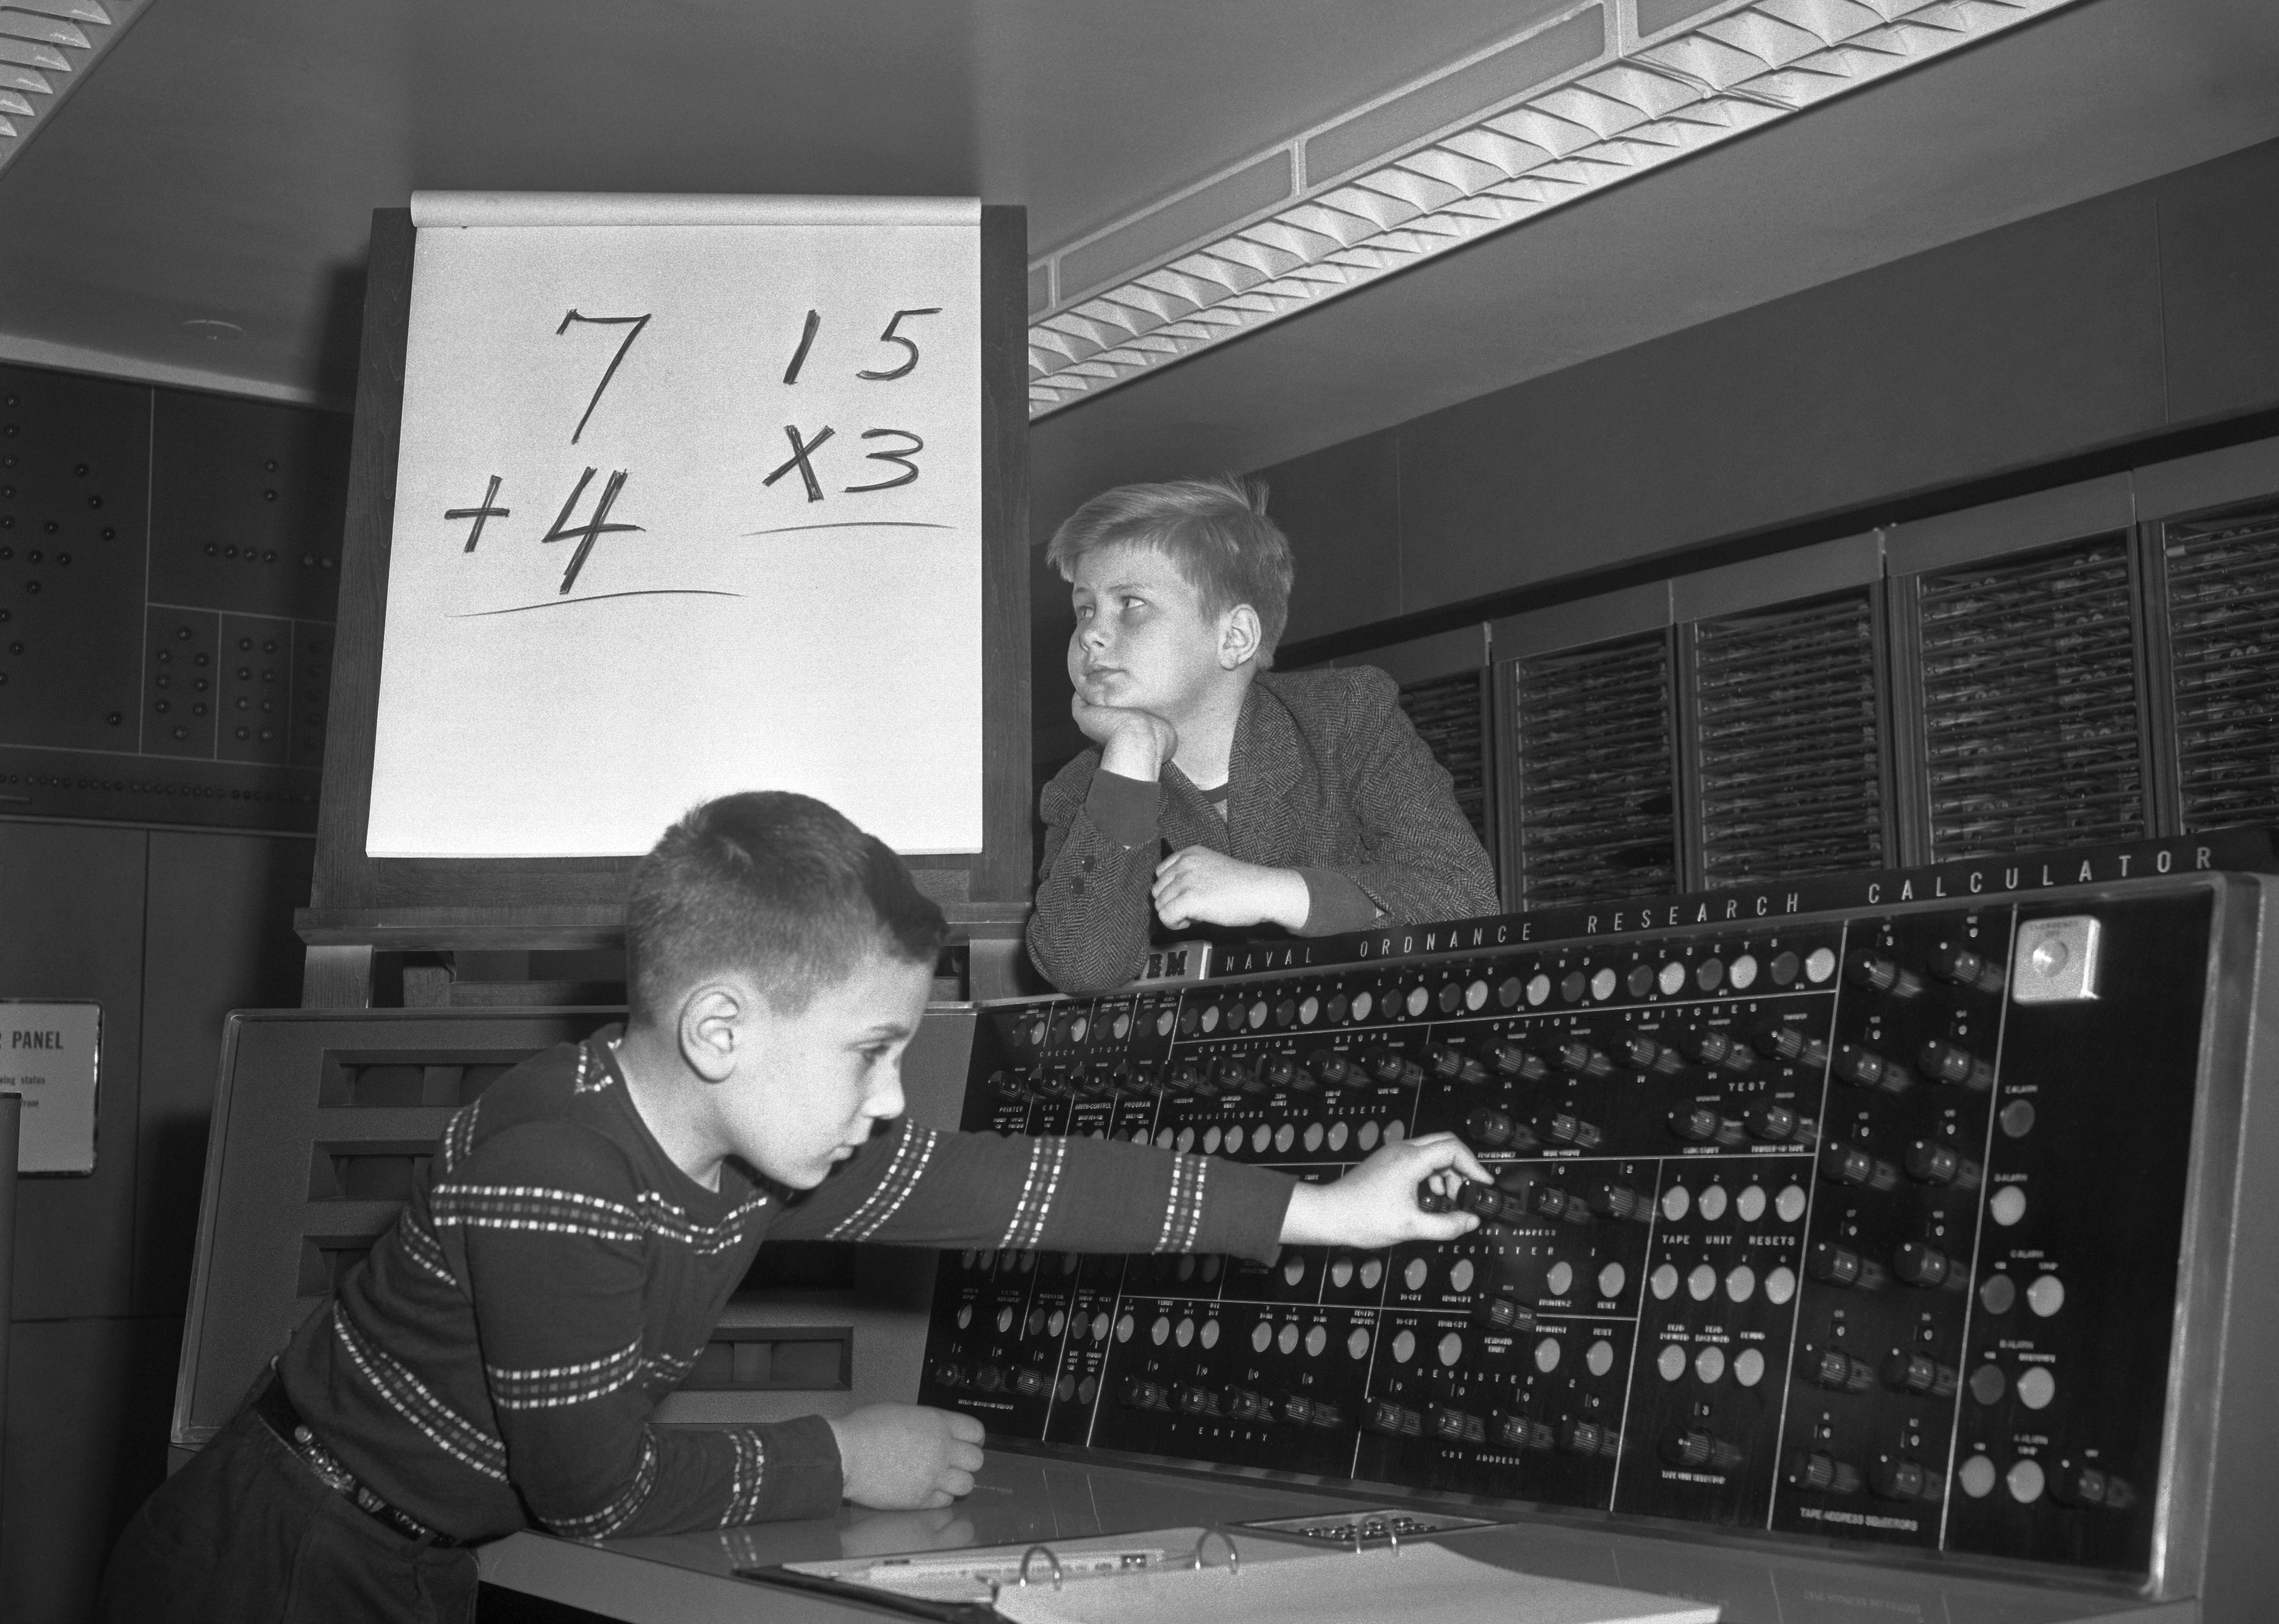 Two young boys brainstorm an equation while playing on a giant electronic calculator at IBM.